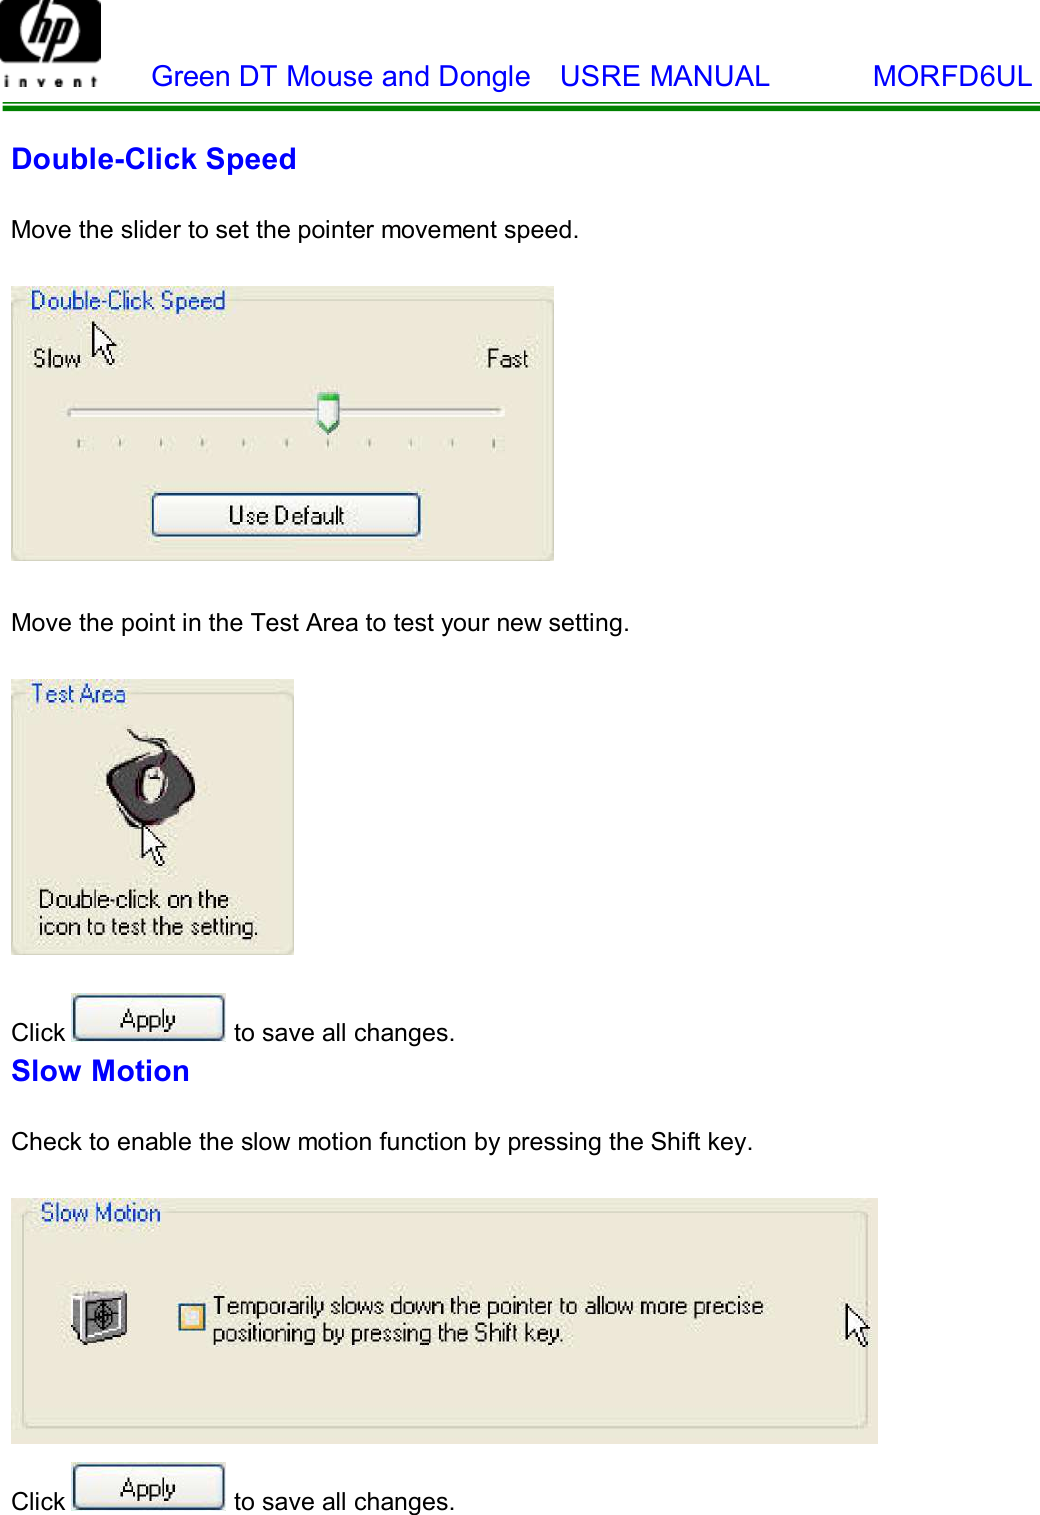    Green DT Mouse and Dongle  USRE MANUAL       MORFD6UL     Double-Click Speed   Move the slider to set the pointer movement speed.      Move the point in the Test Area to test your new setting.       Click  to save all changes. Slow Motion   Check to enable the slow motion function by pressing the Shift key.      Click  to save all changes. 